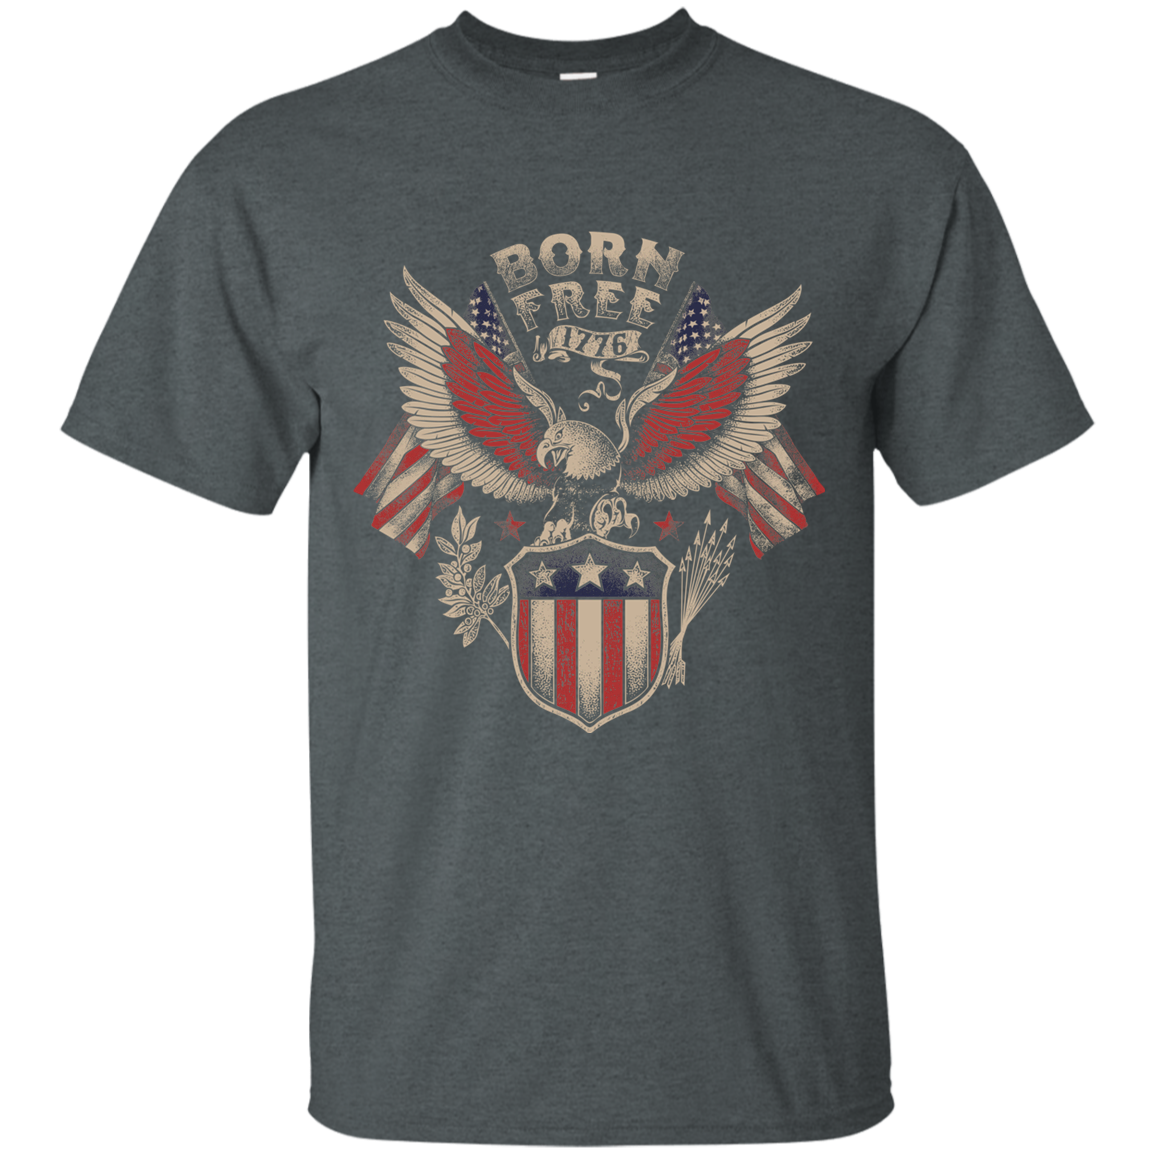 Born Free, Not for Granted... - Apparel